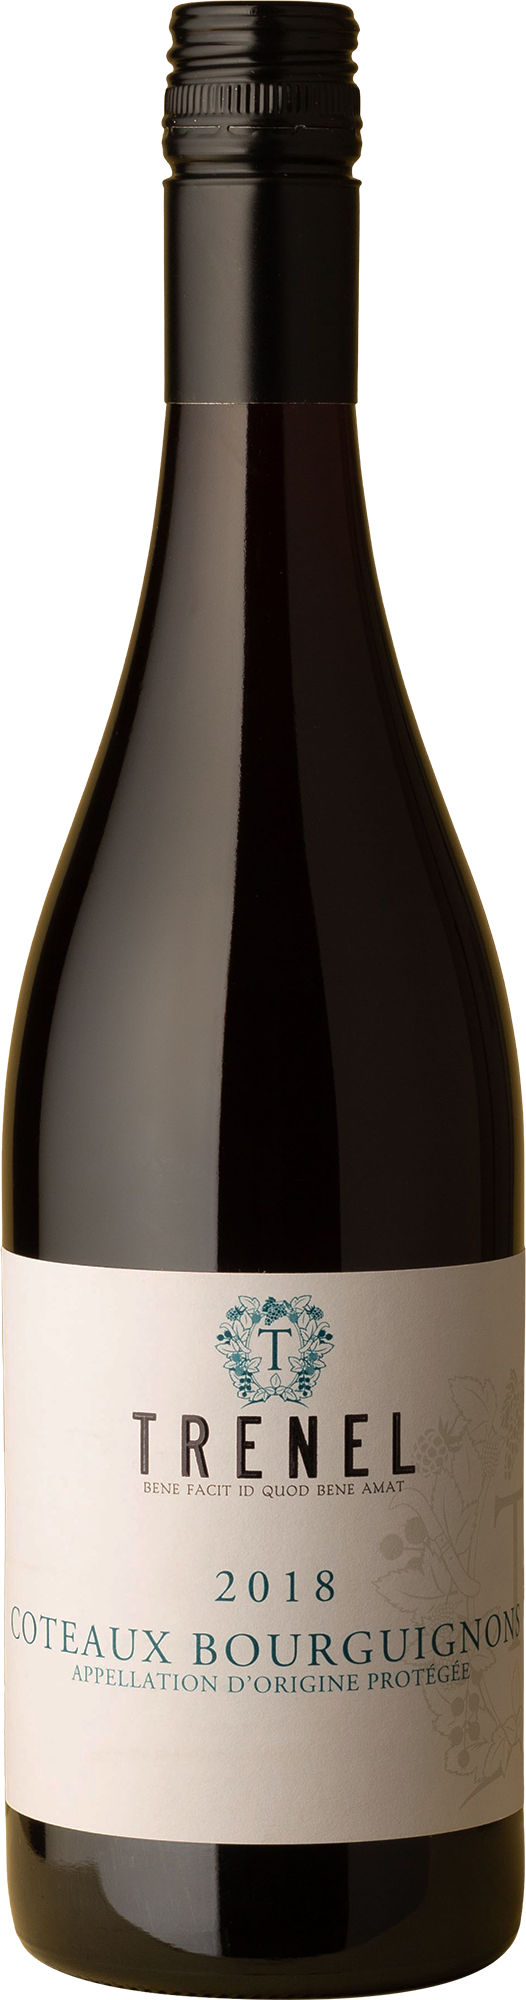 Trenel - Coteaux Bourguignons Gamay 2018 Red Wine